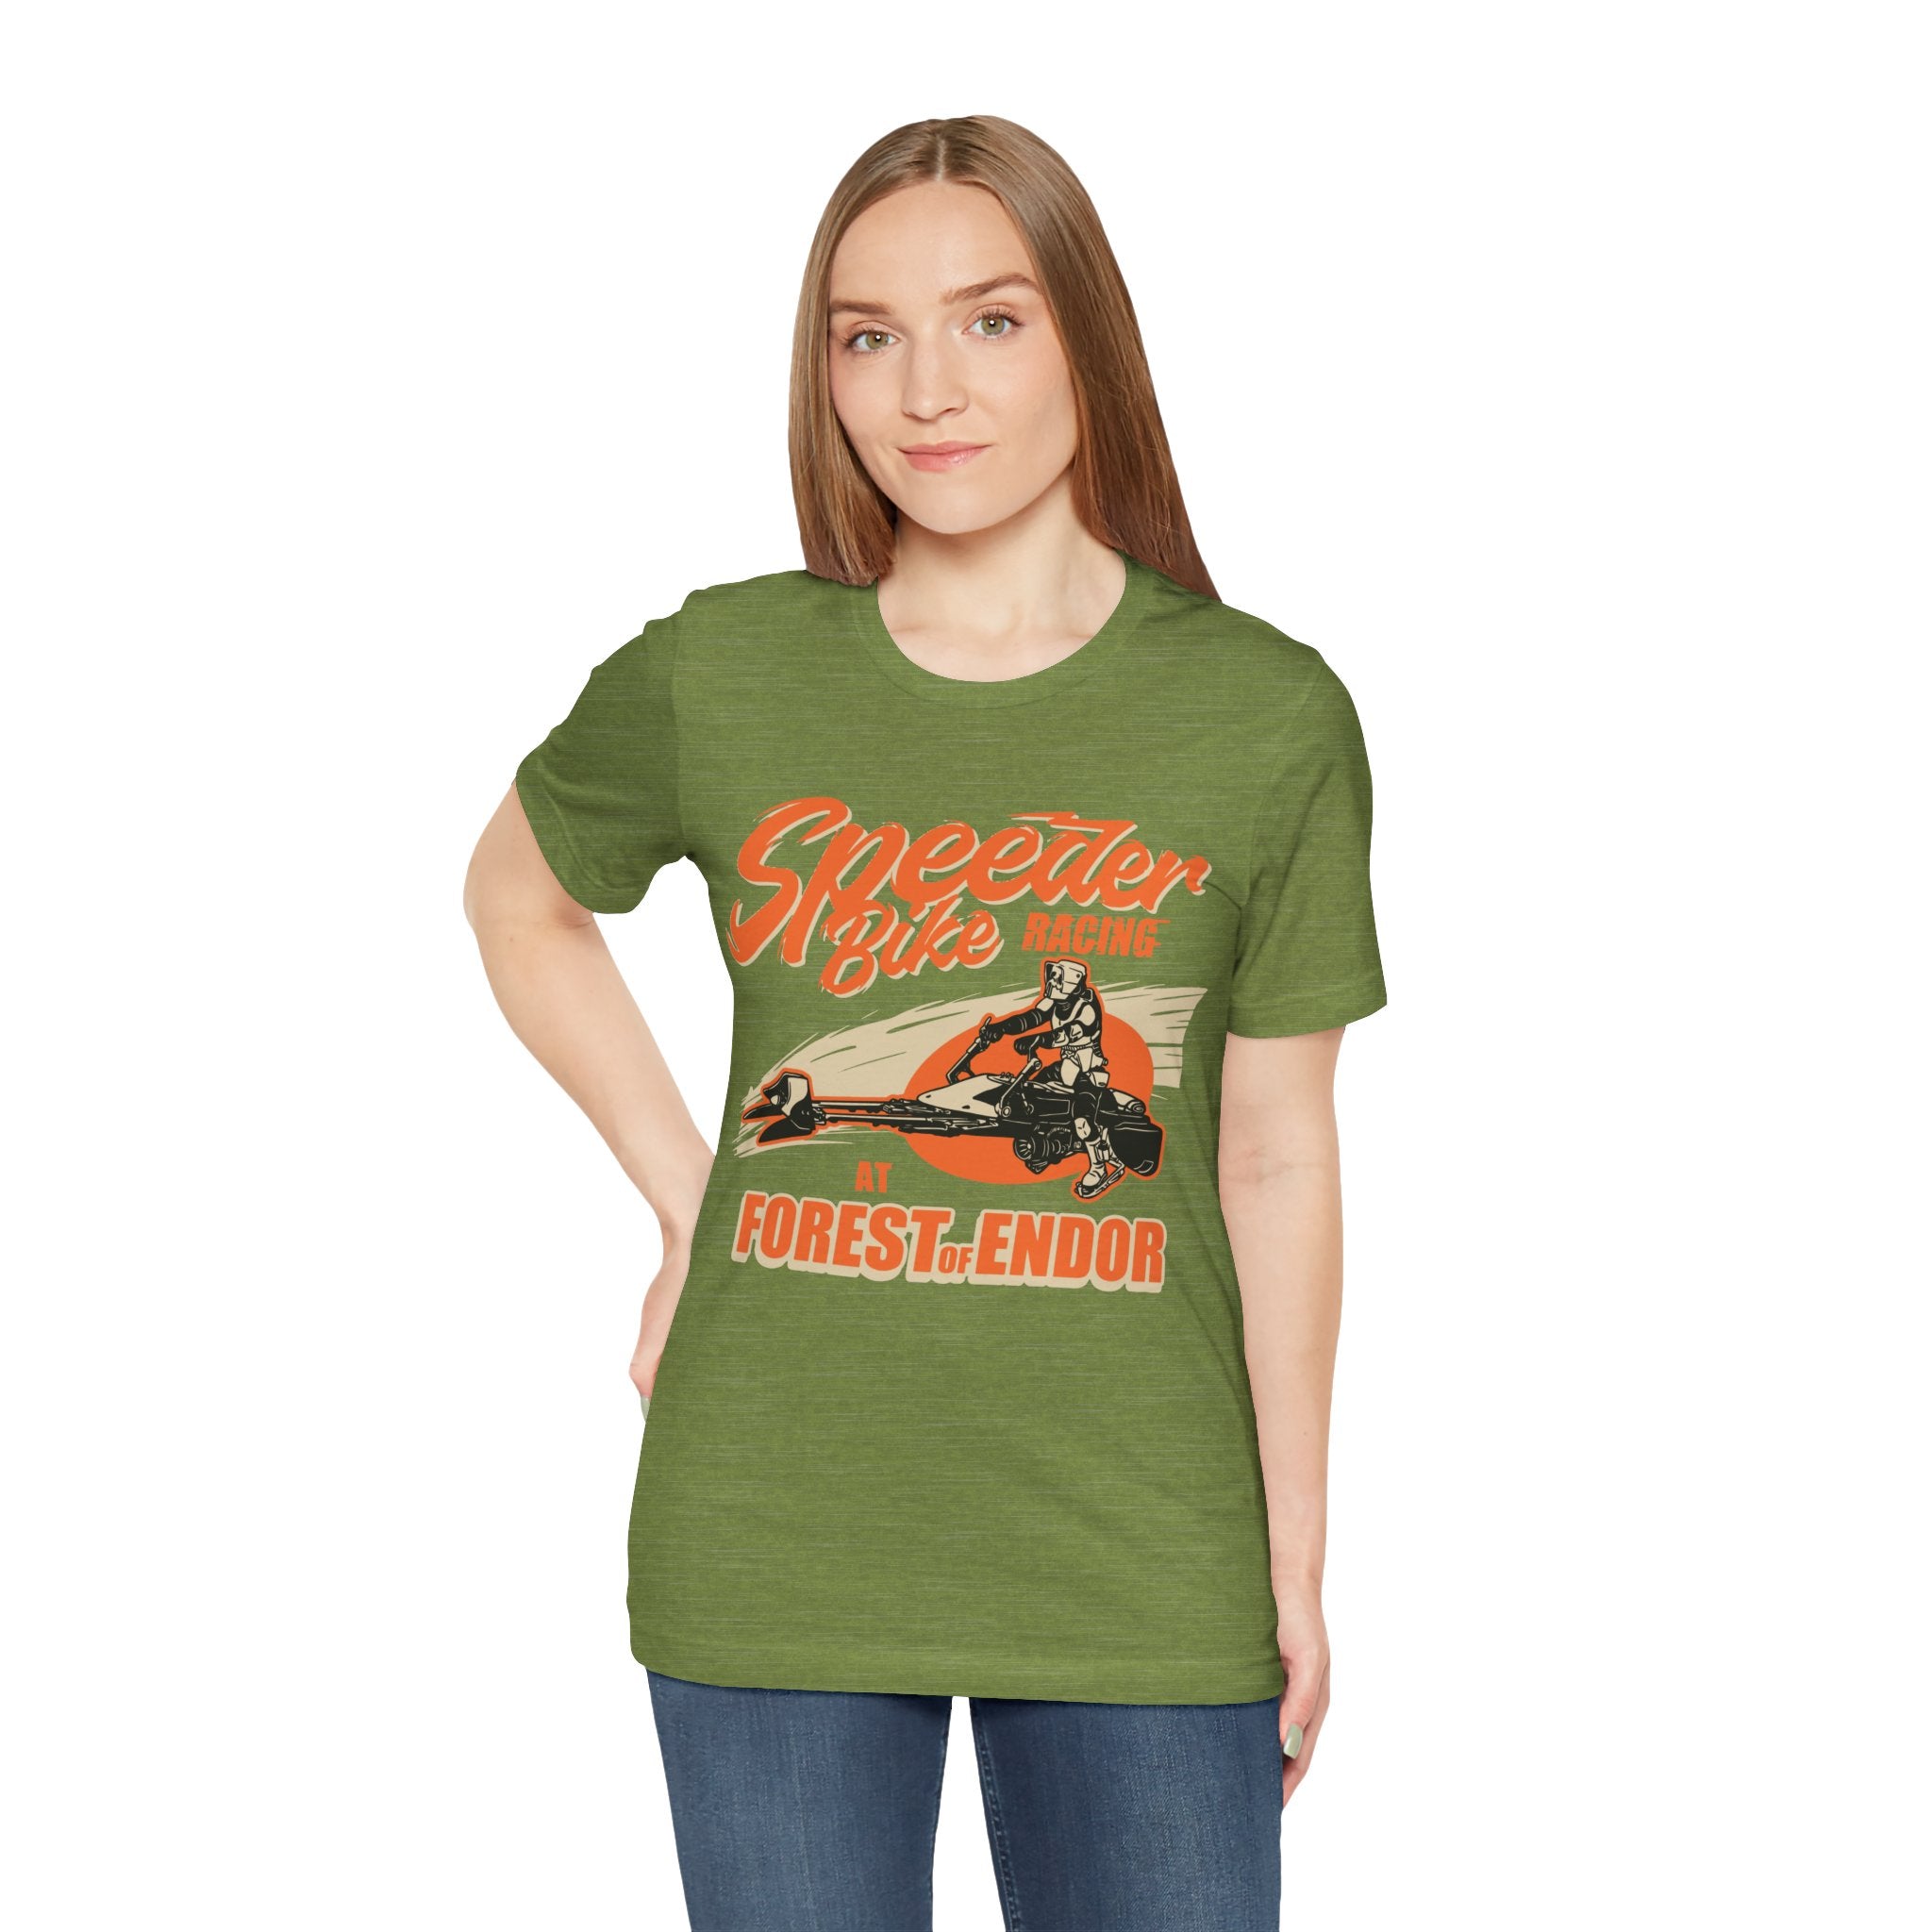 Woman wearing a green jersey tee with a Speeder Bike Racing graphic design.